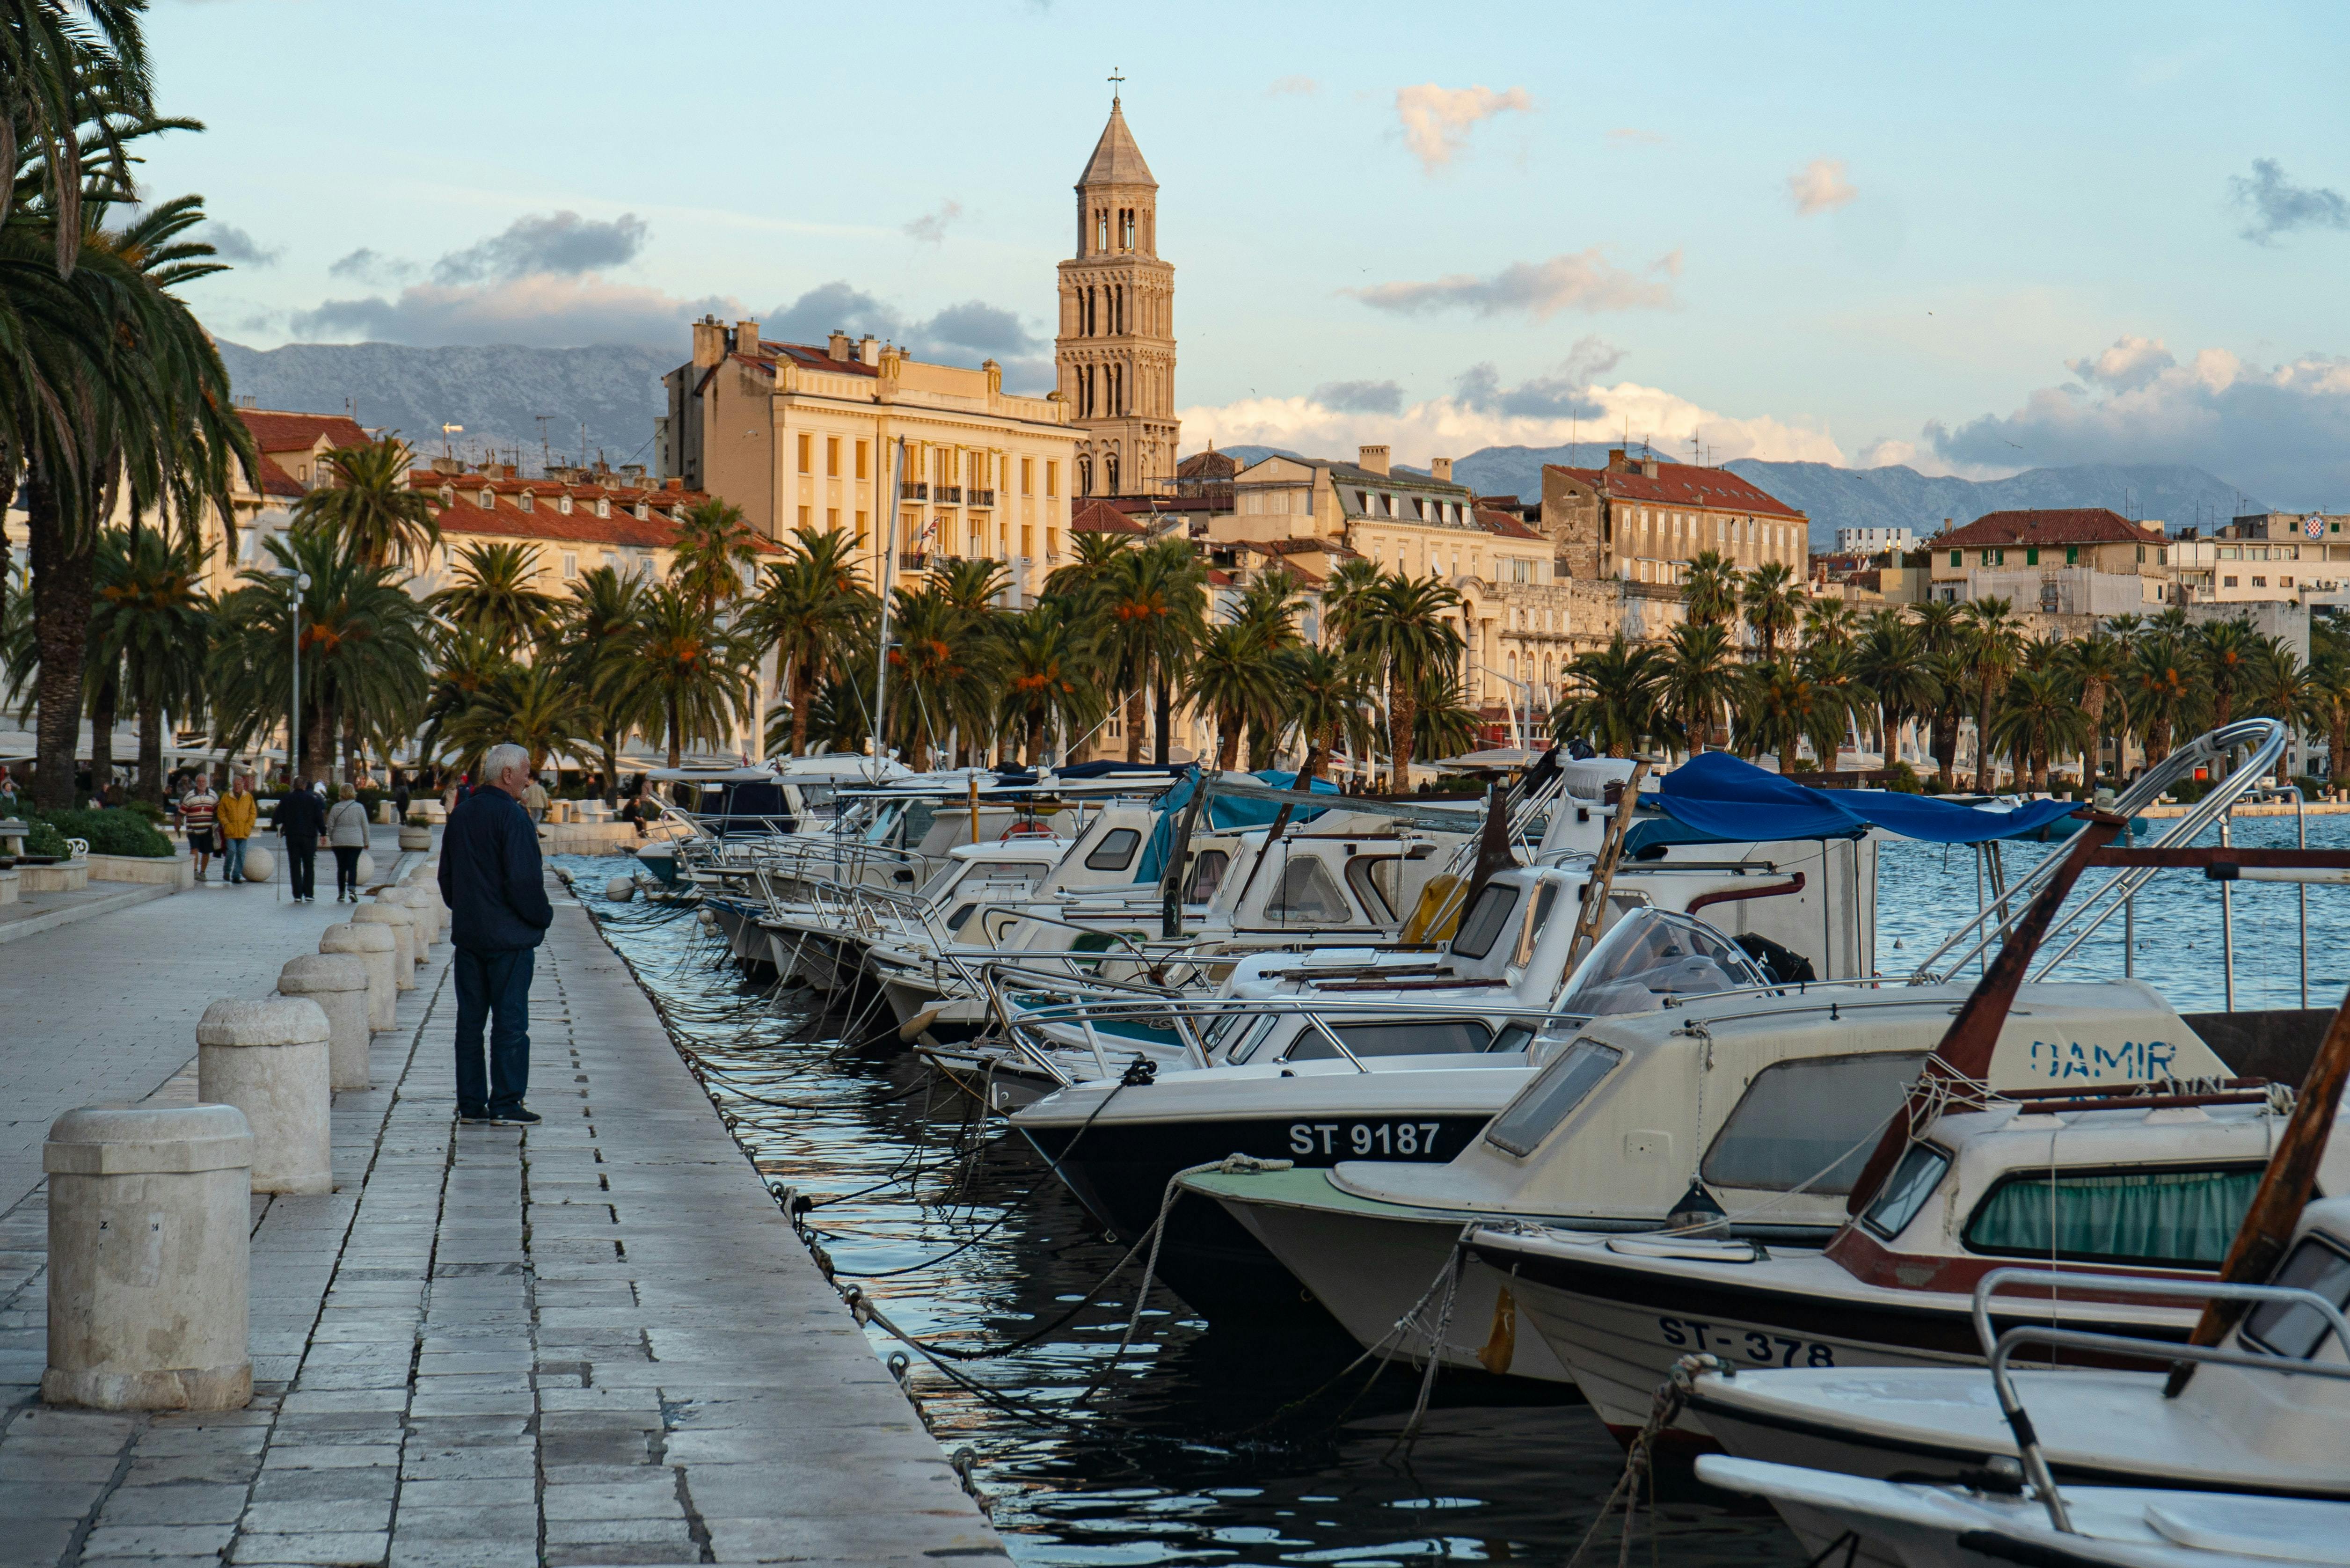 3 Days in Split: The Perfect Split Itinerary - Road Affair